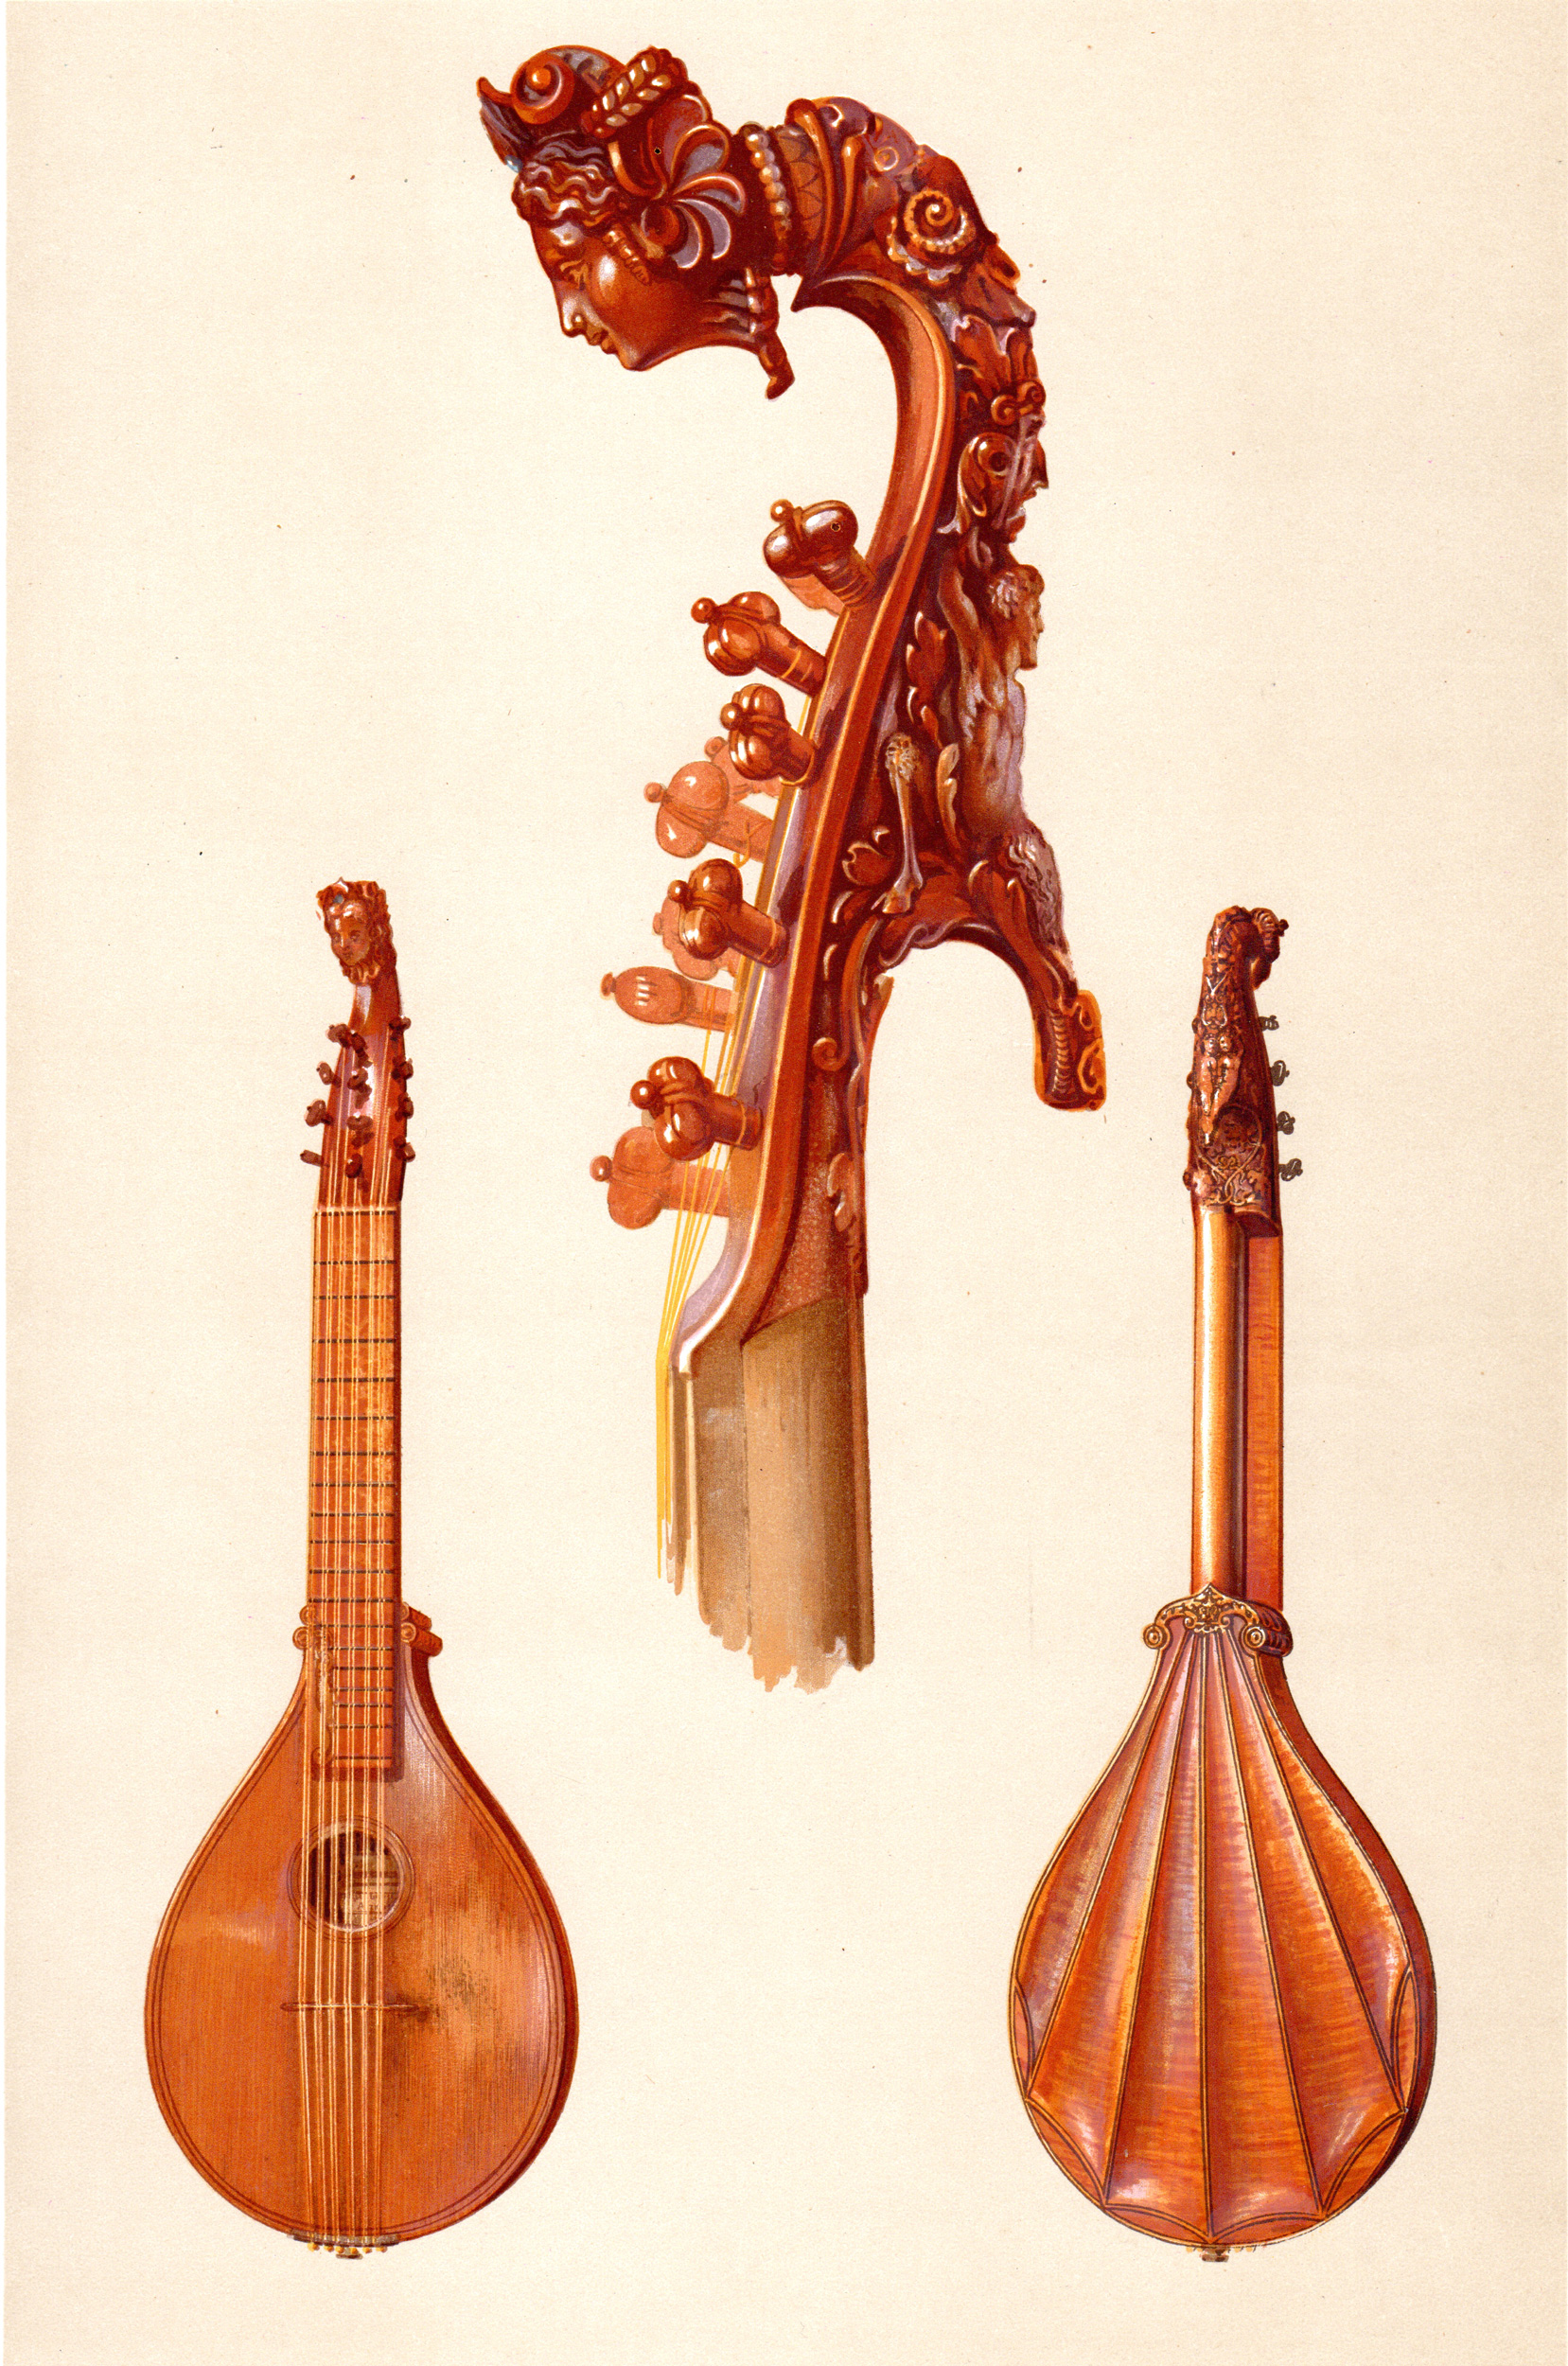 Musical Instruments Historic, Rare and Unique by A.J. Hipkins, illustrated by William Gibbs (1888)